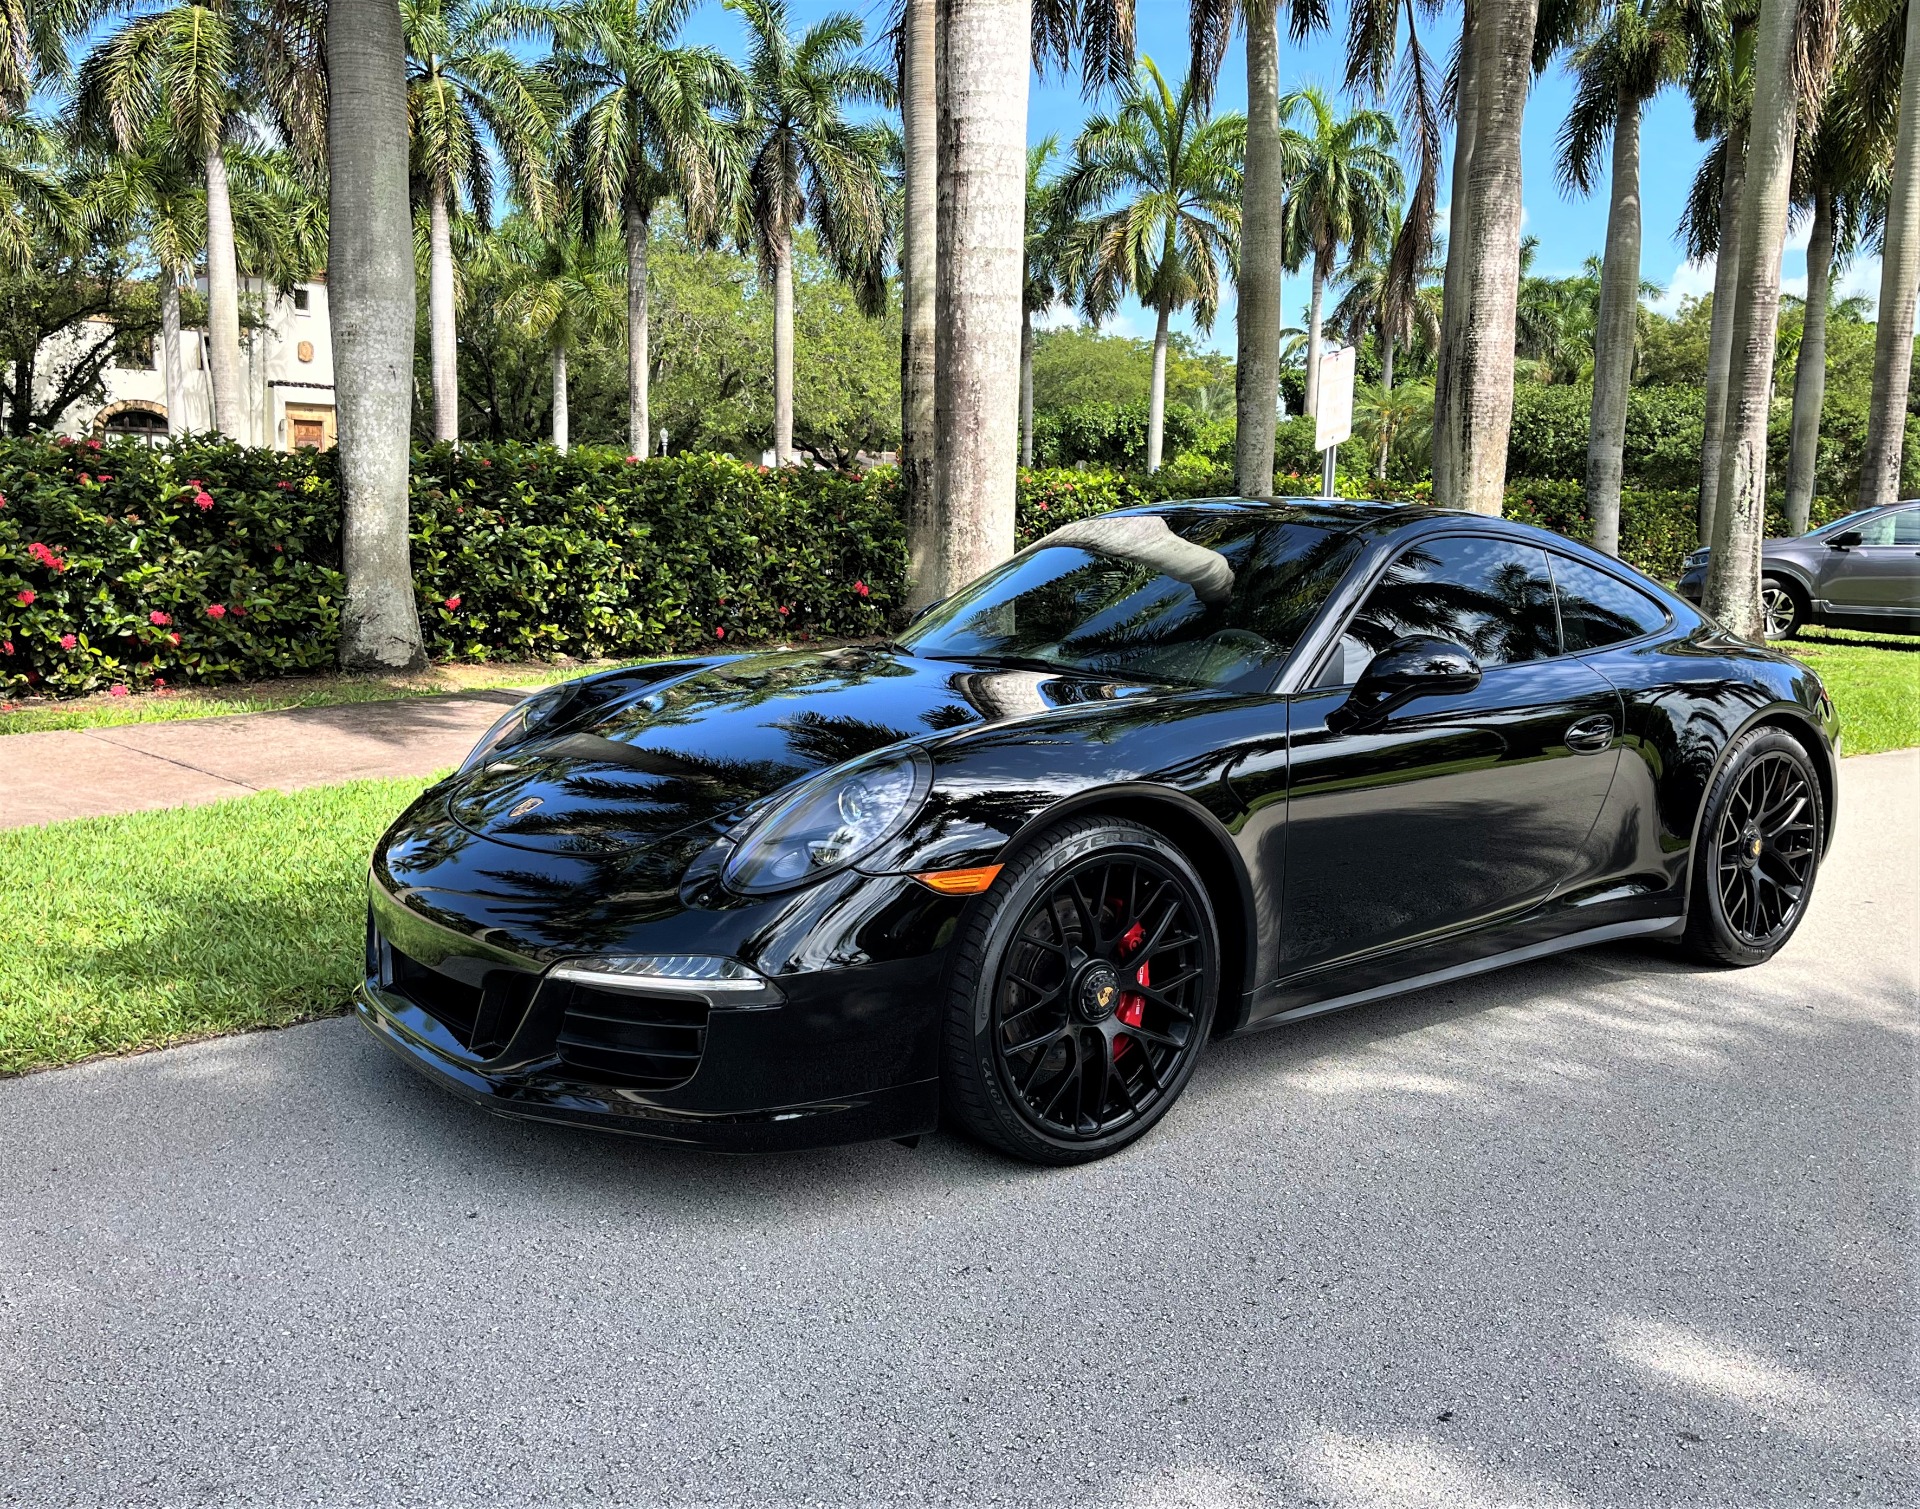 Used 2016 Porsche 911 Carrera 4 GTS for sale $134,850 at The Gables Sports Cars in Miami FL 33146 4